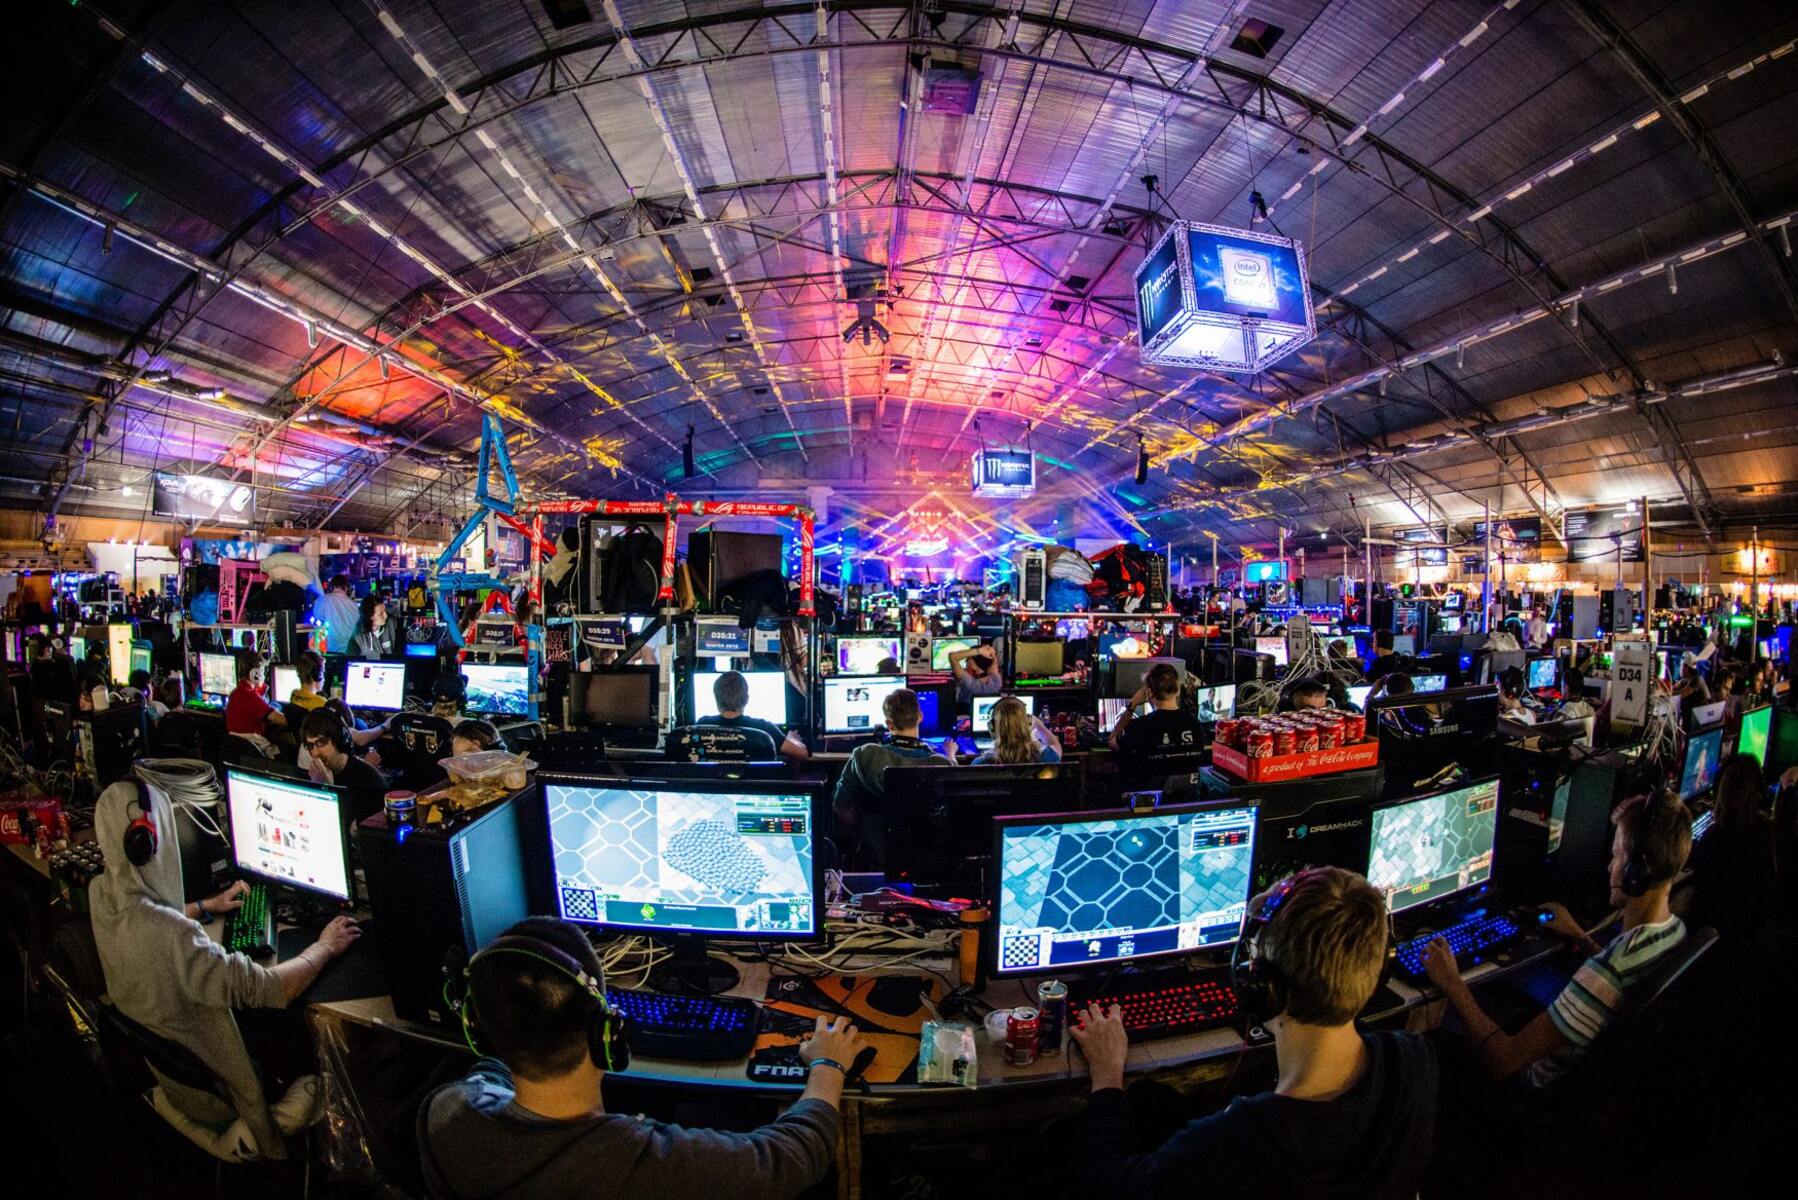 15 Facts About DreamHack (Digital Festival)